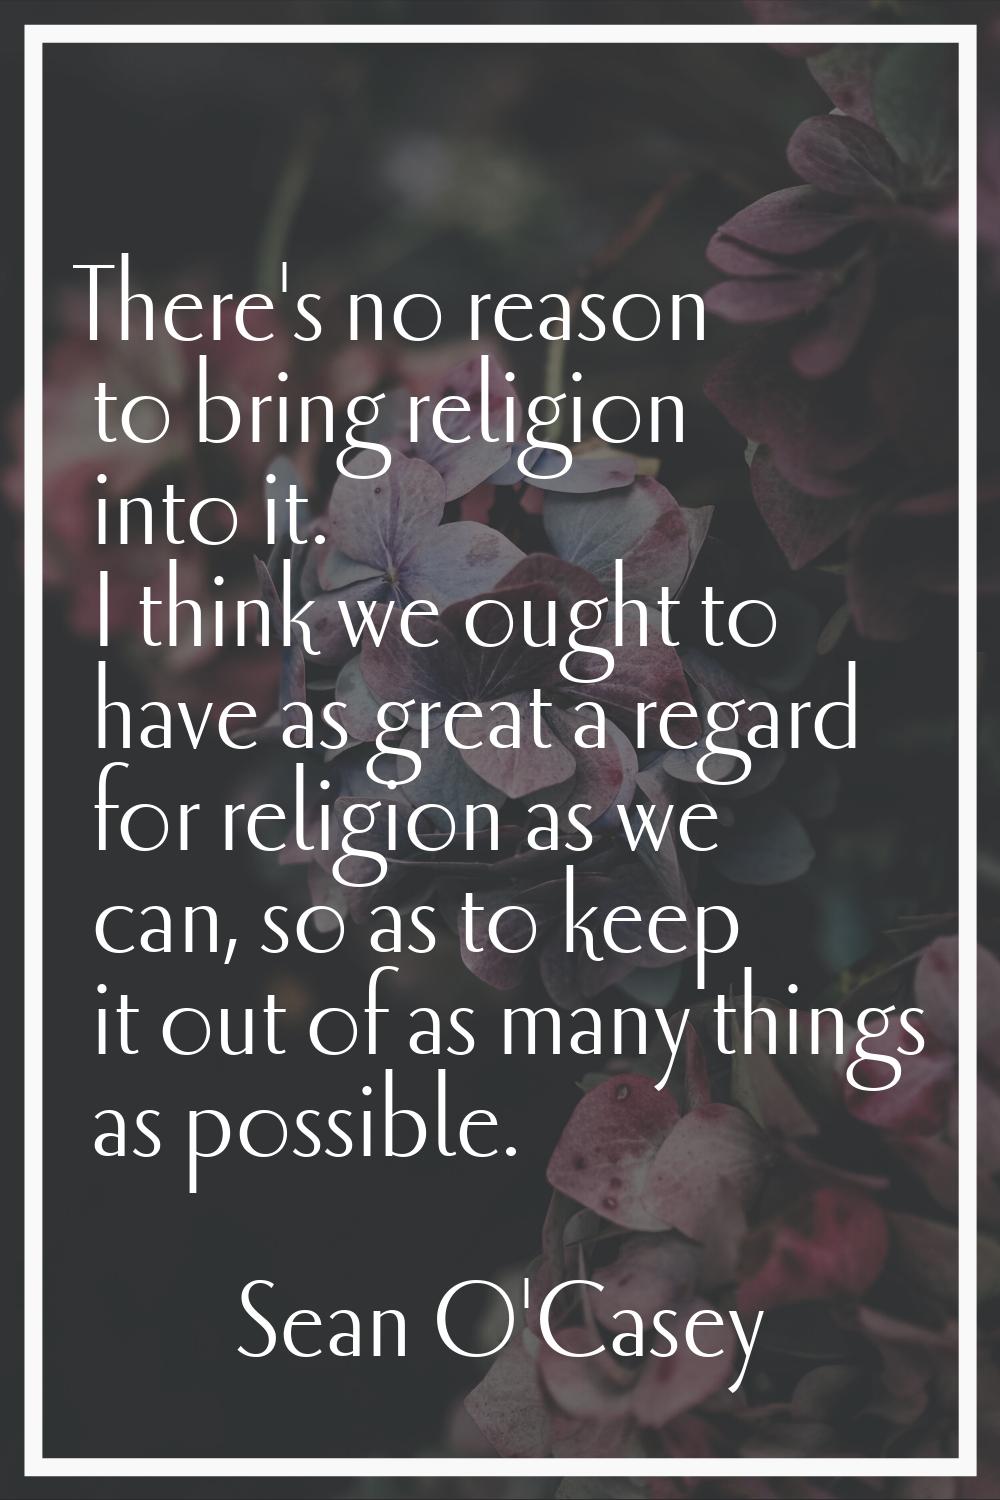 There's no reason to bring religion into it. I think we ought to have as great a regard for religio